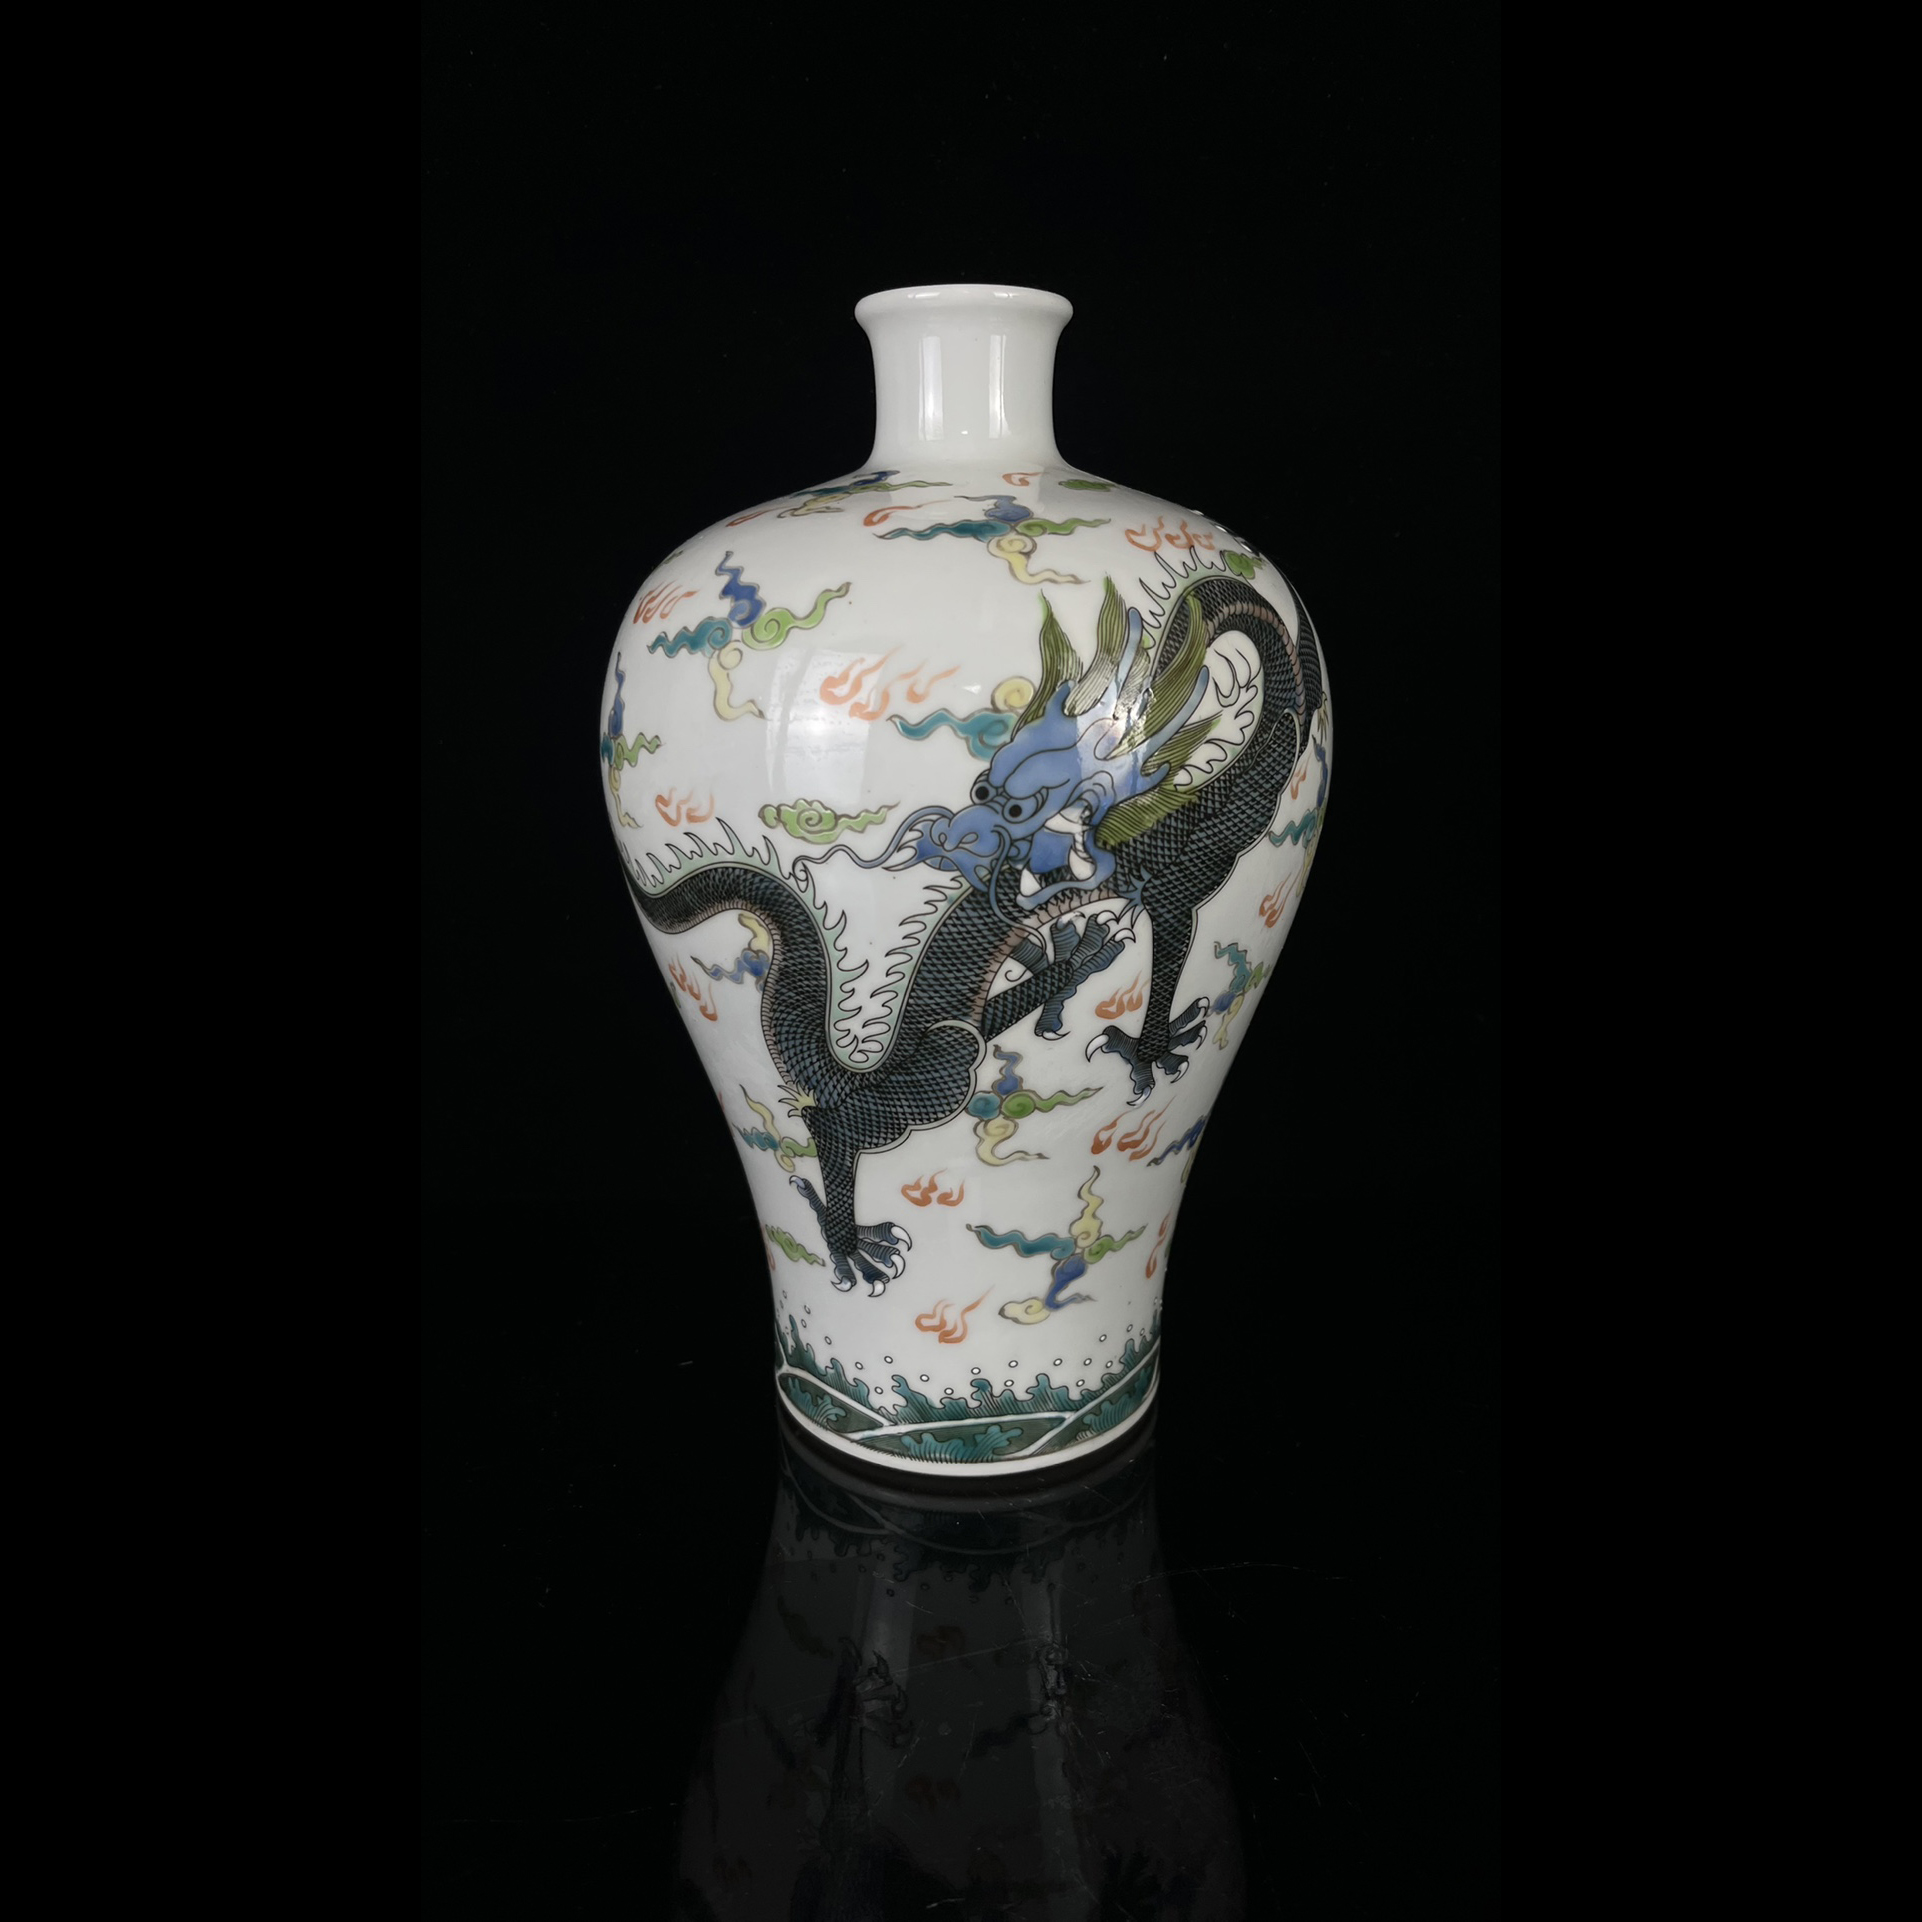 Five-color porcelain plate and dragon plum vase made in the Kangxi period of the Qing Dynasty